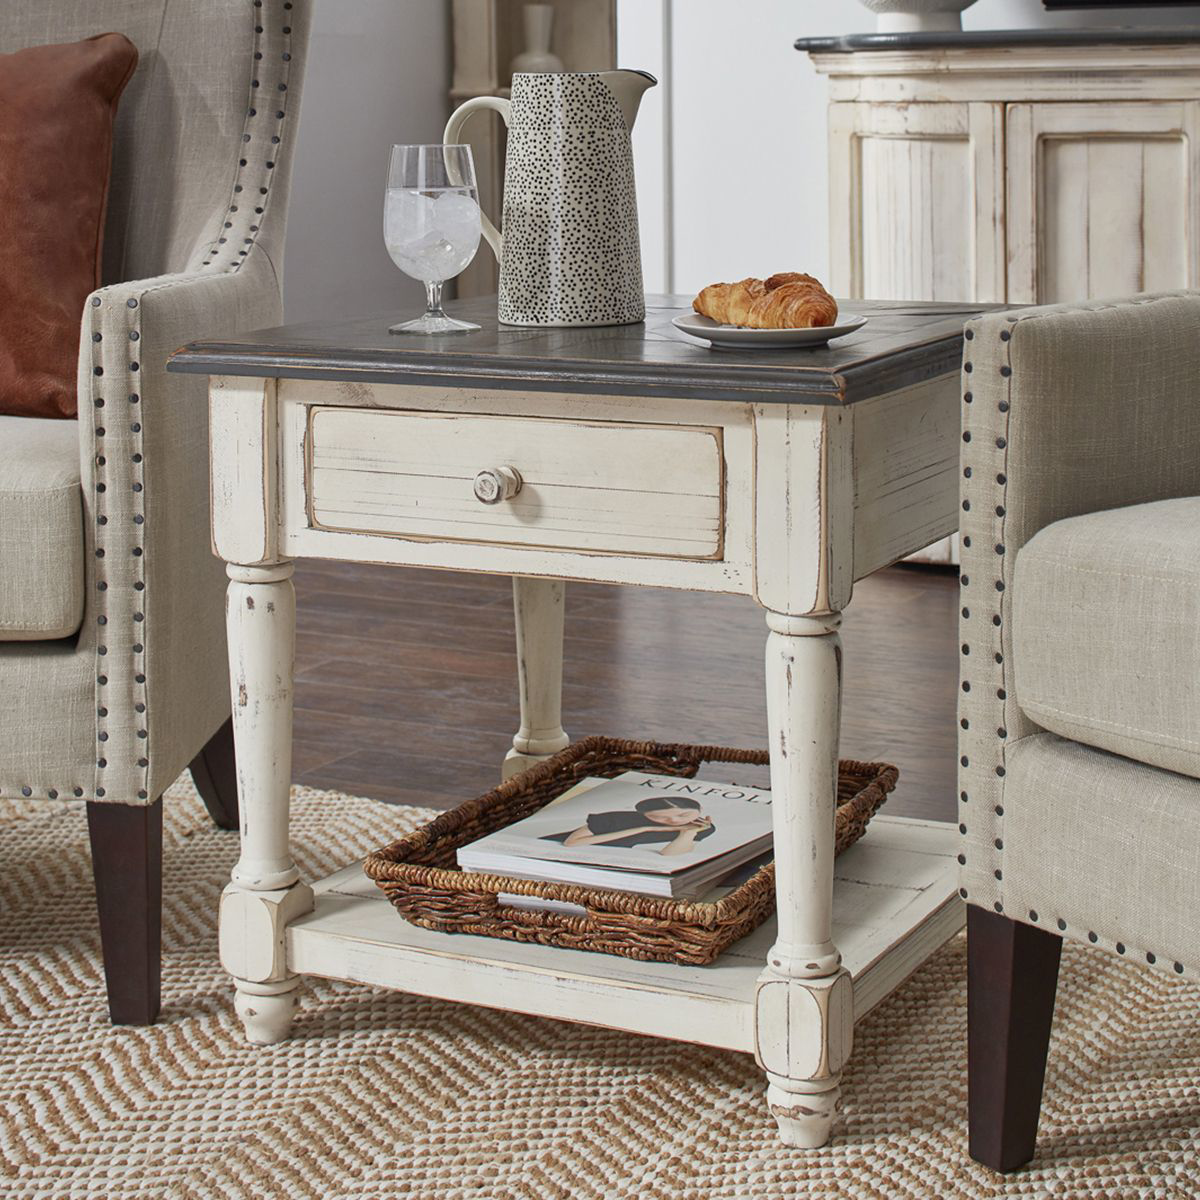 Picture of HINSDALE GRY END TABLE